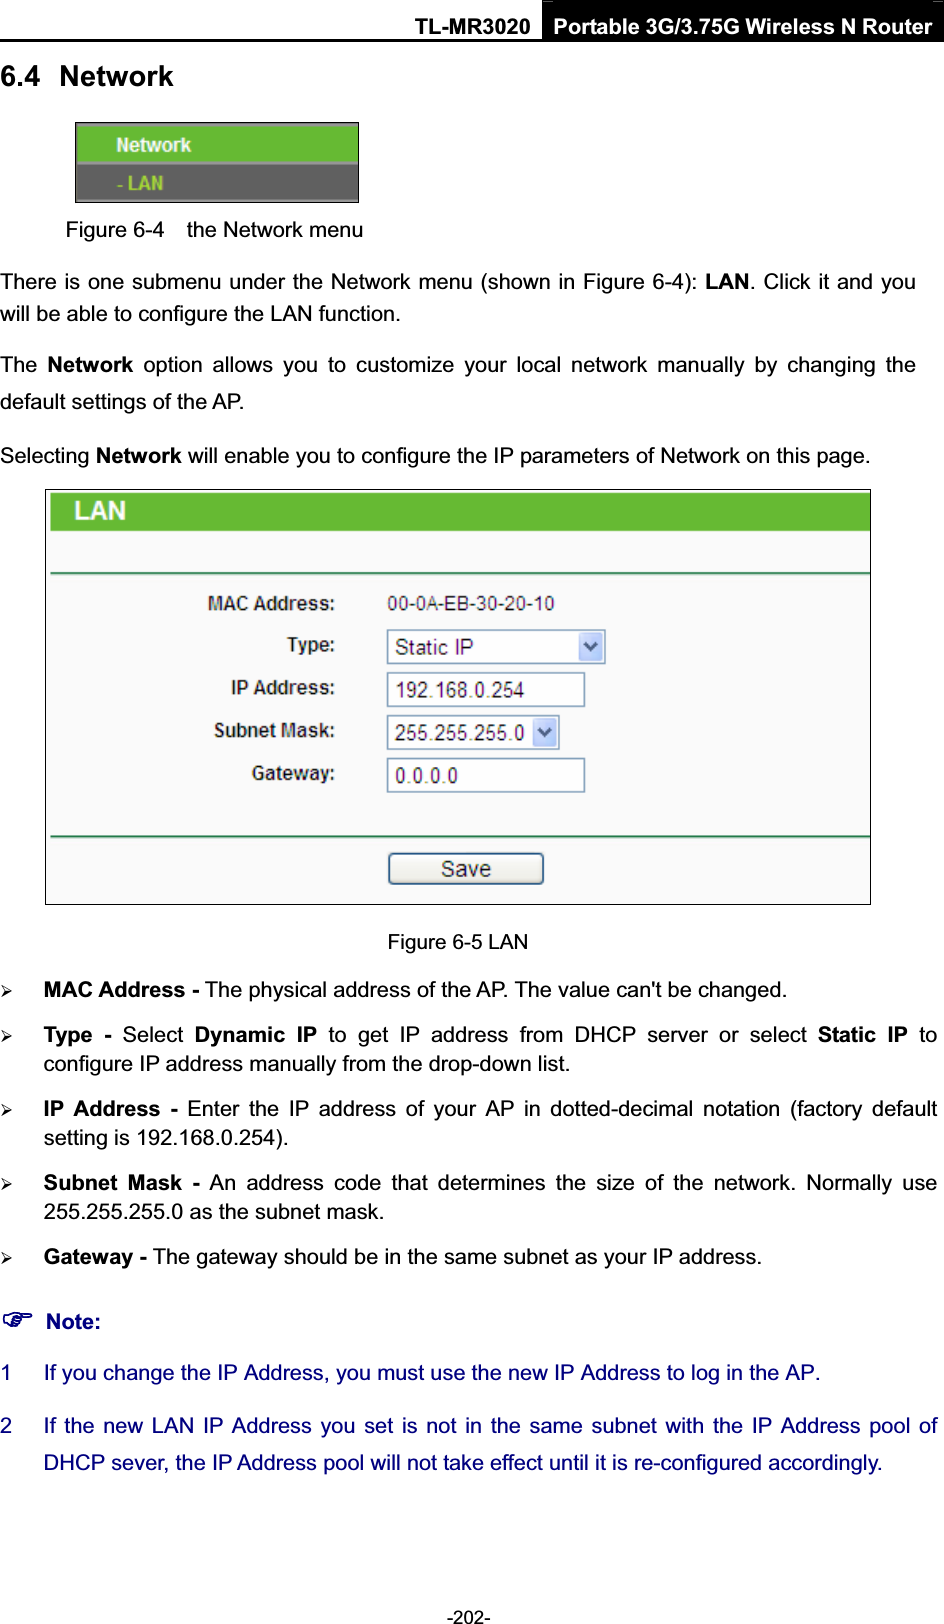 TL-MR3020 Portable 3G/3.75G Wireless N Router-202-6.4 NetworkFigure 6-4    the Network menu There is one submenu under the Network menu (shown in Figure 6-4): LAN. Click it and you will be able to configure the LAN function. The Network  option  allows  you  to  customize  your  local  network  manually  by  changing  the default settings of the AP. Selecting Network will enable you to configure the IP parameters of Network on this page. Figure 6-5 LAN ¾MAC Address - The physical address of the AP. The value can&apos;t be changed.   ¾Type  -  Select  Dynamic  IP  to  get  IP  address  from  DHCP  server  or  select  Static  IP  to configure IP address manually from the drop-down list.   ¾IP  Address  -  Enter  the  IP  address  of  your  AP  in  dotted-decimal  notation  (factory  default setting is 192.168.0.254). ¾Subnet  Mask  -  An  address  code  that  determines  the  size  of  the  network.  Normally  use 255.255.255.0 as the subnet mask.   ¾Gateway - The gateway should be in the same subnet as your IP address.   )Note:1  If you change the IP Address, you must use the new IP Address to log in the AP. 2  If the new LAN IP Address you set is not in the same subnet with the IP Address pool of DHCP sever, the IP Address pool will not take effect until it is re-configured accordingly. 